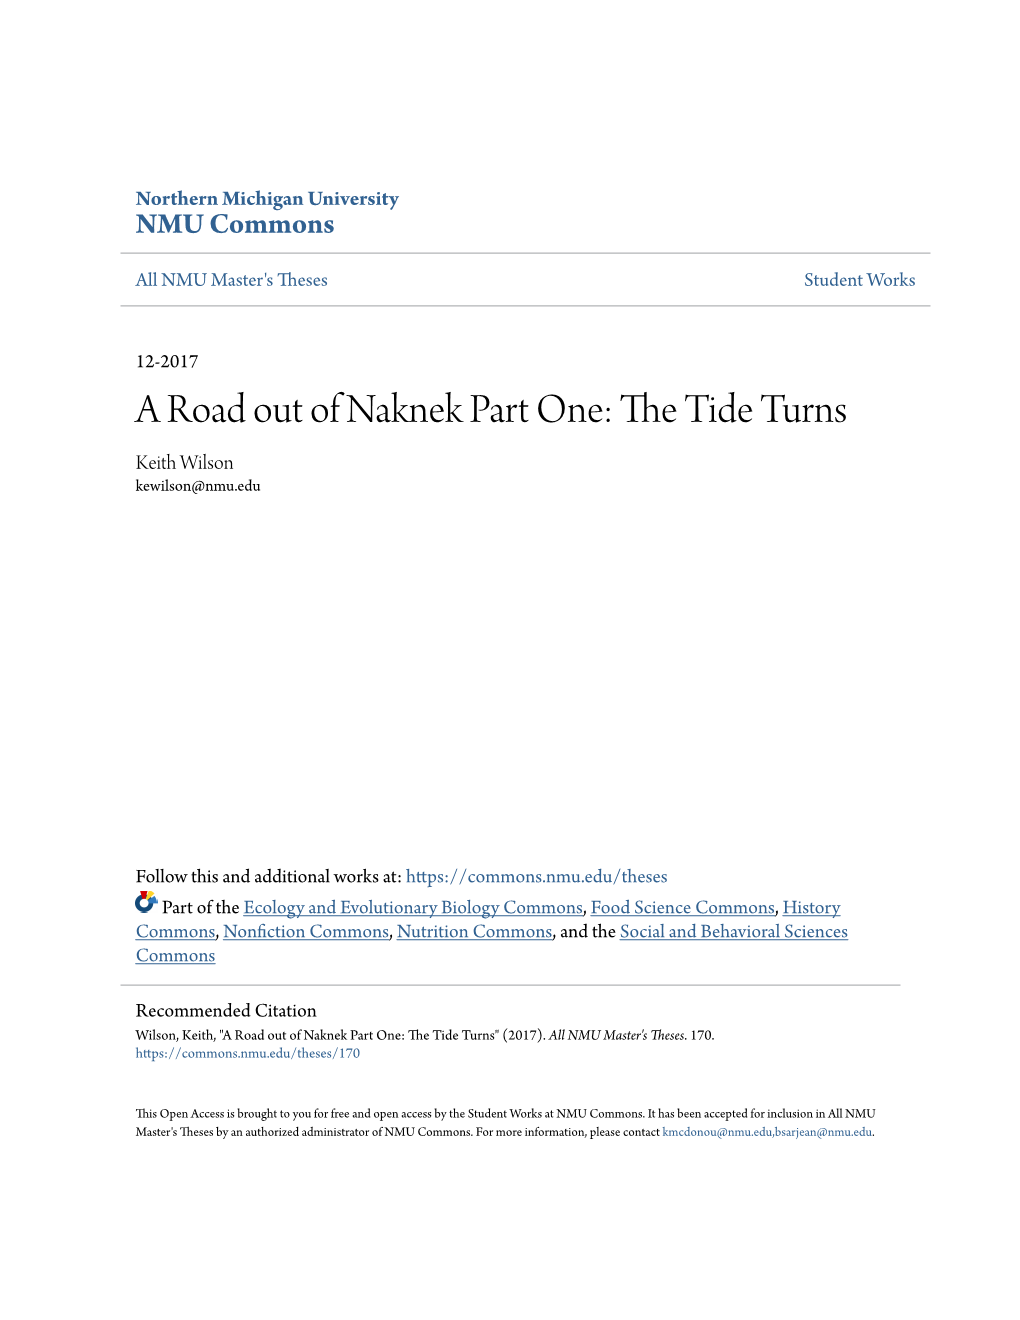 A Road out of Naknek Part One: the Tide Turns